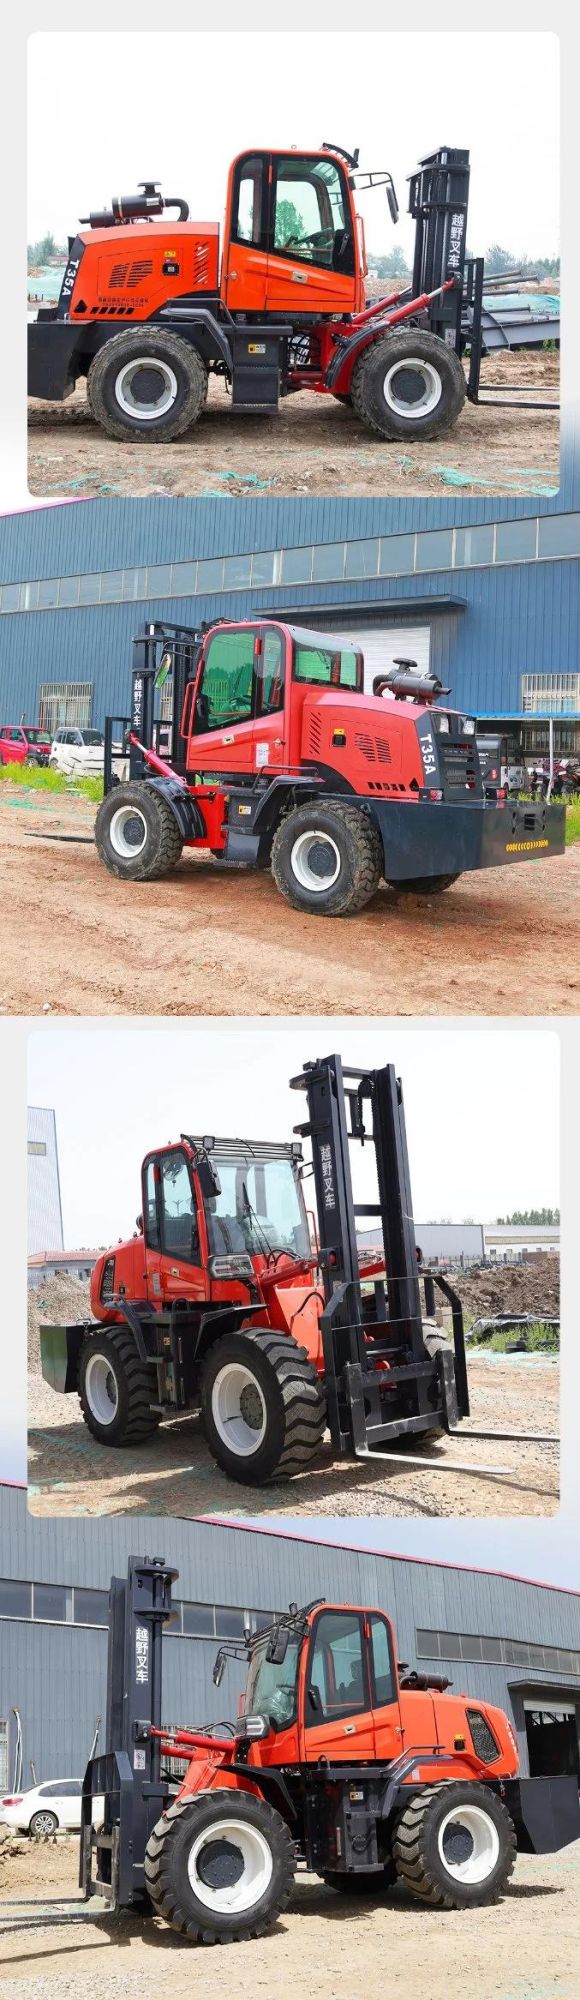 Four-Wheel Hydraulic Cross-Country Forklift Forklifts Made in China Forklifts of Various Specifications